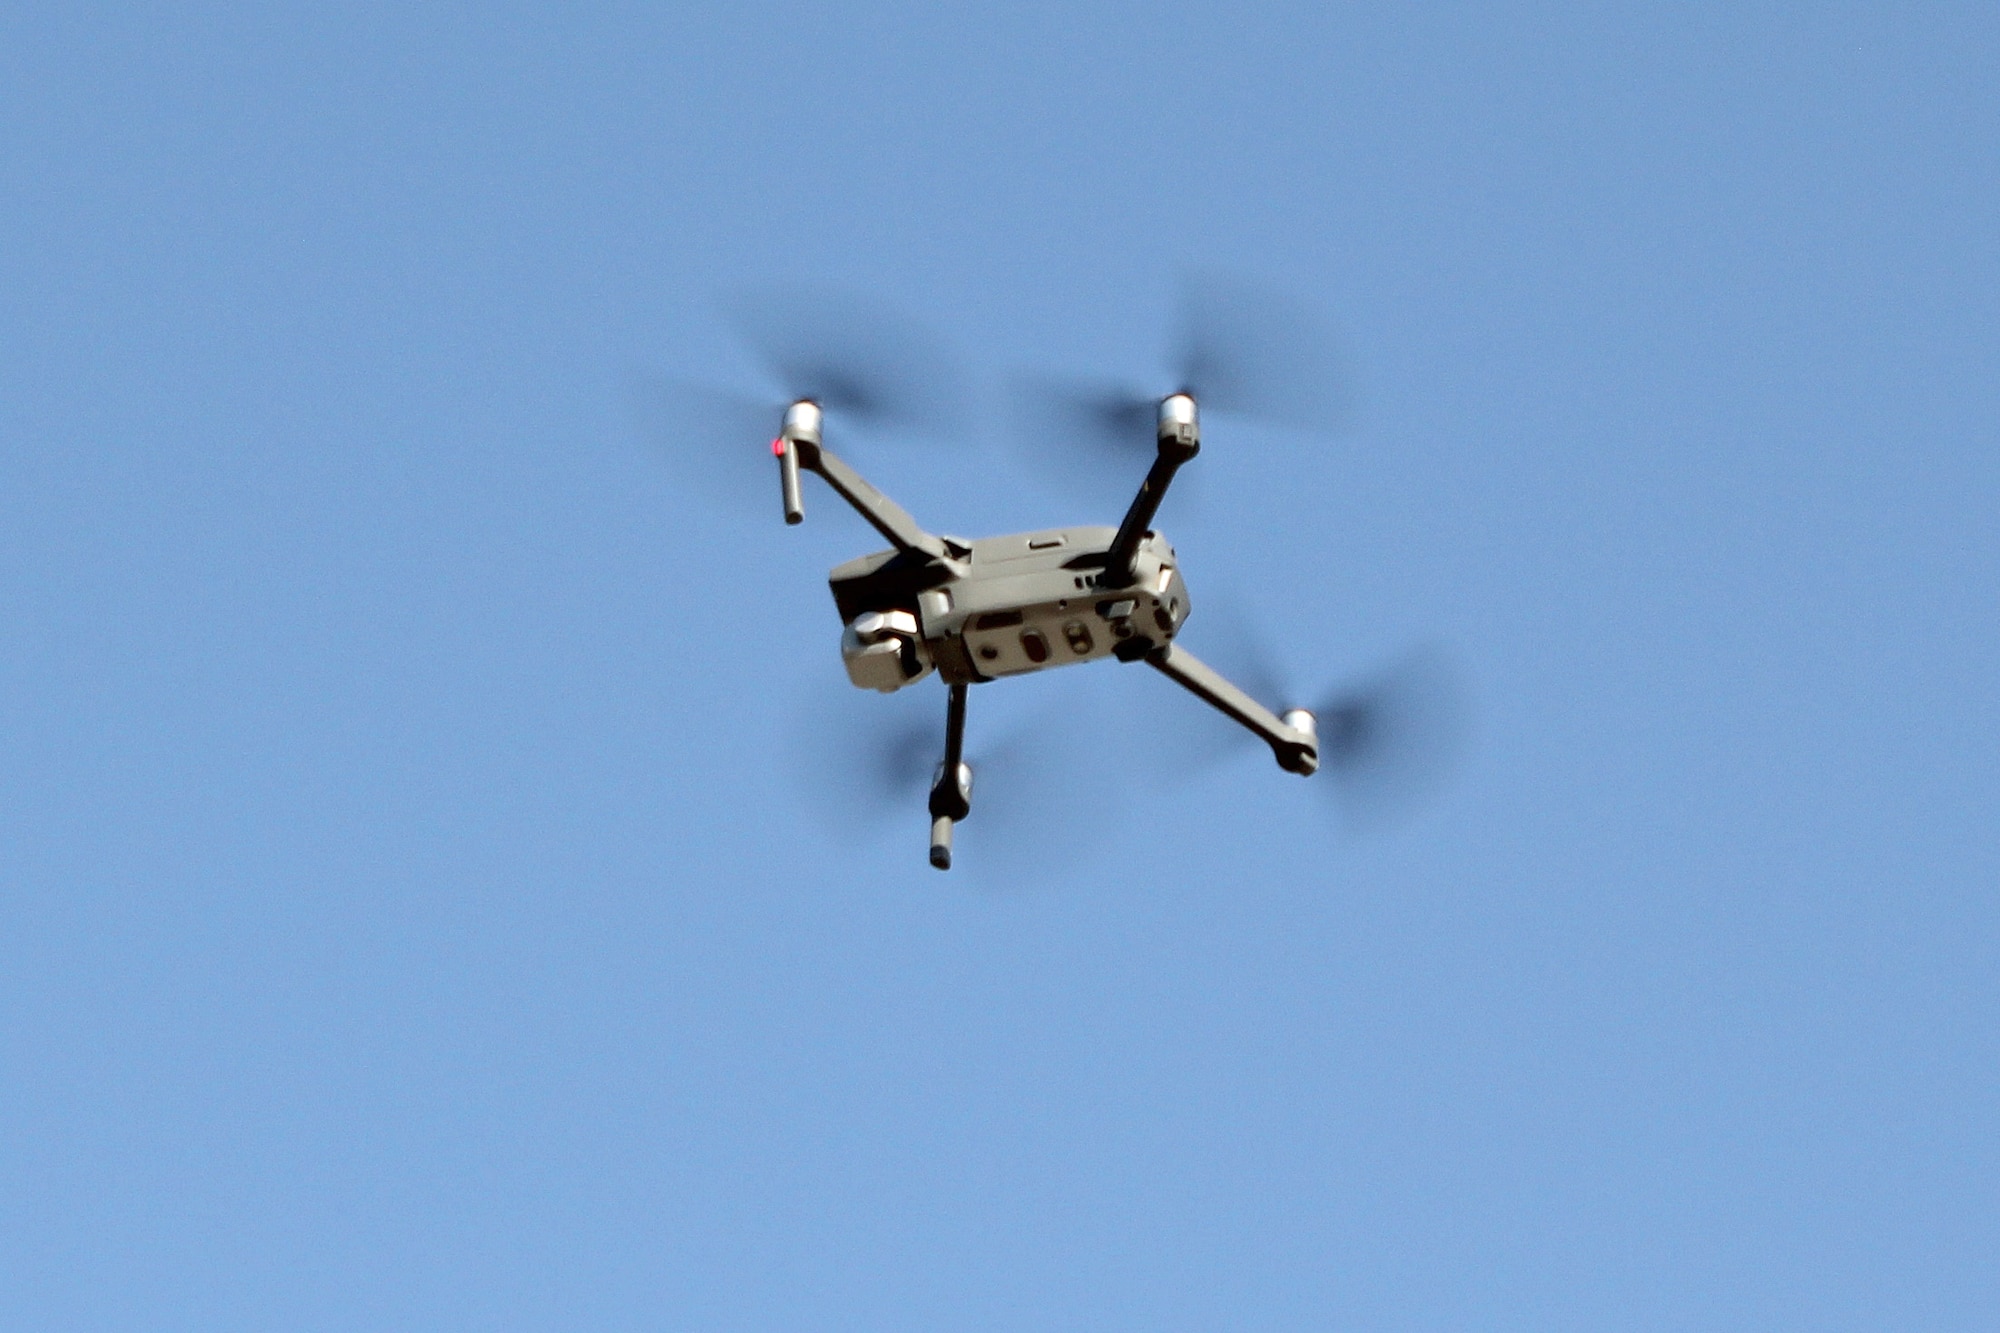 An unmanned aerial system, operated by the 380th Expeditionary Security Forces Squadron, flies over Al Dhafra Air Base, United Arab Emirates during an exercise at the base, Dec. 3, 2021. The 380th Expeditionary Security Forces Squadron at the base has responsibility for countering potential UAS threats.